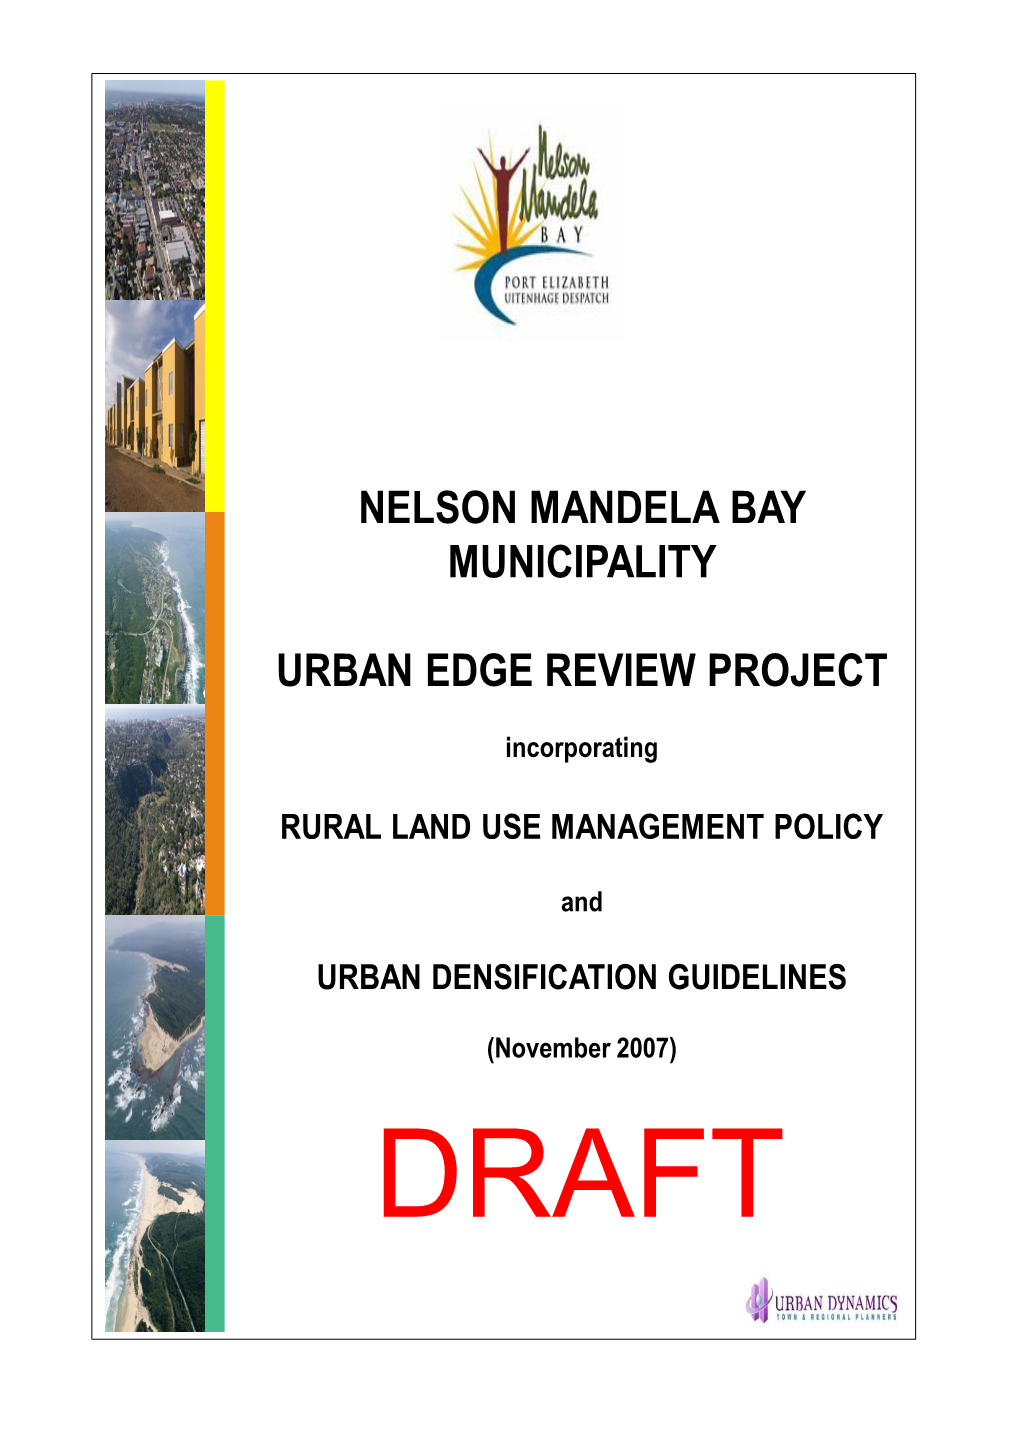 Urban Edge Review Project